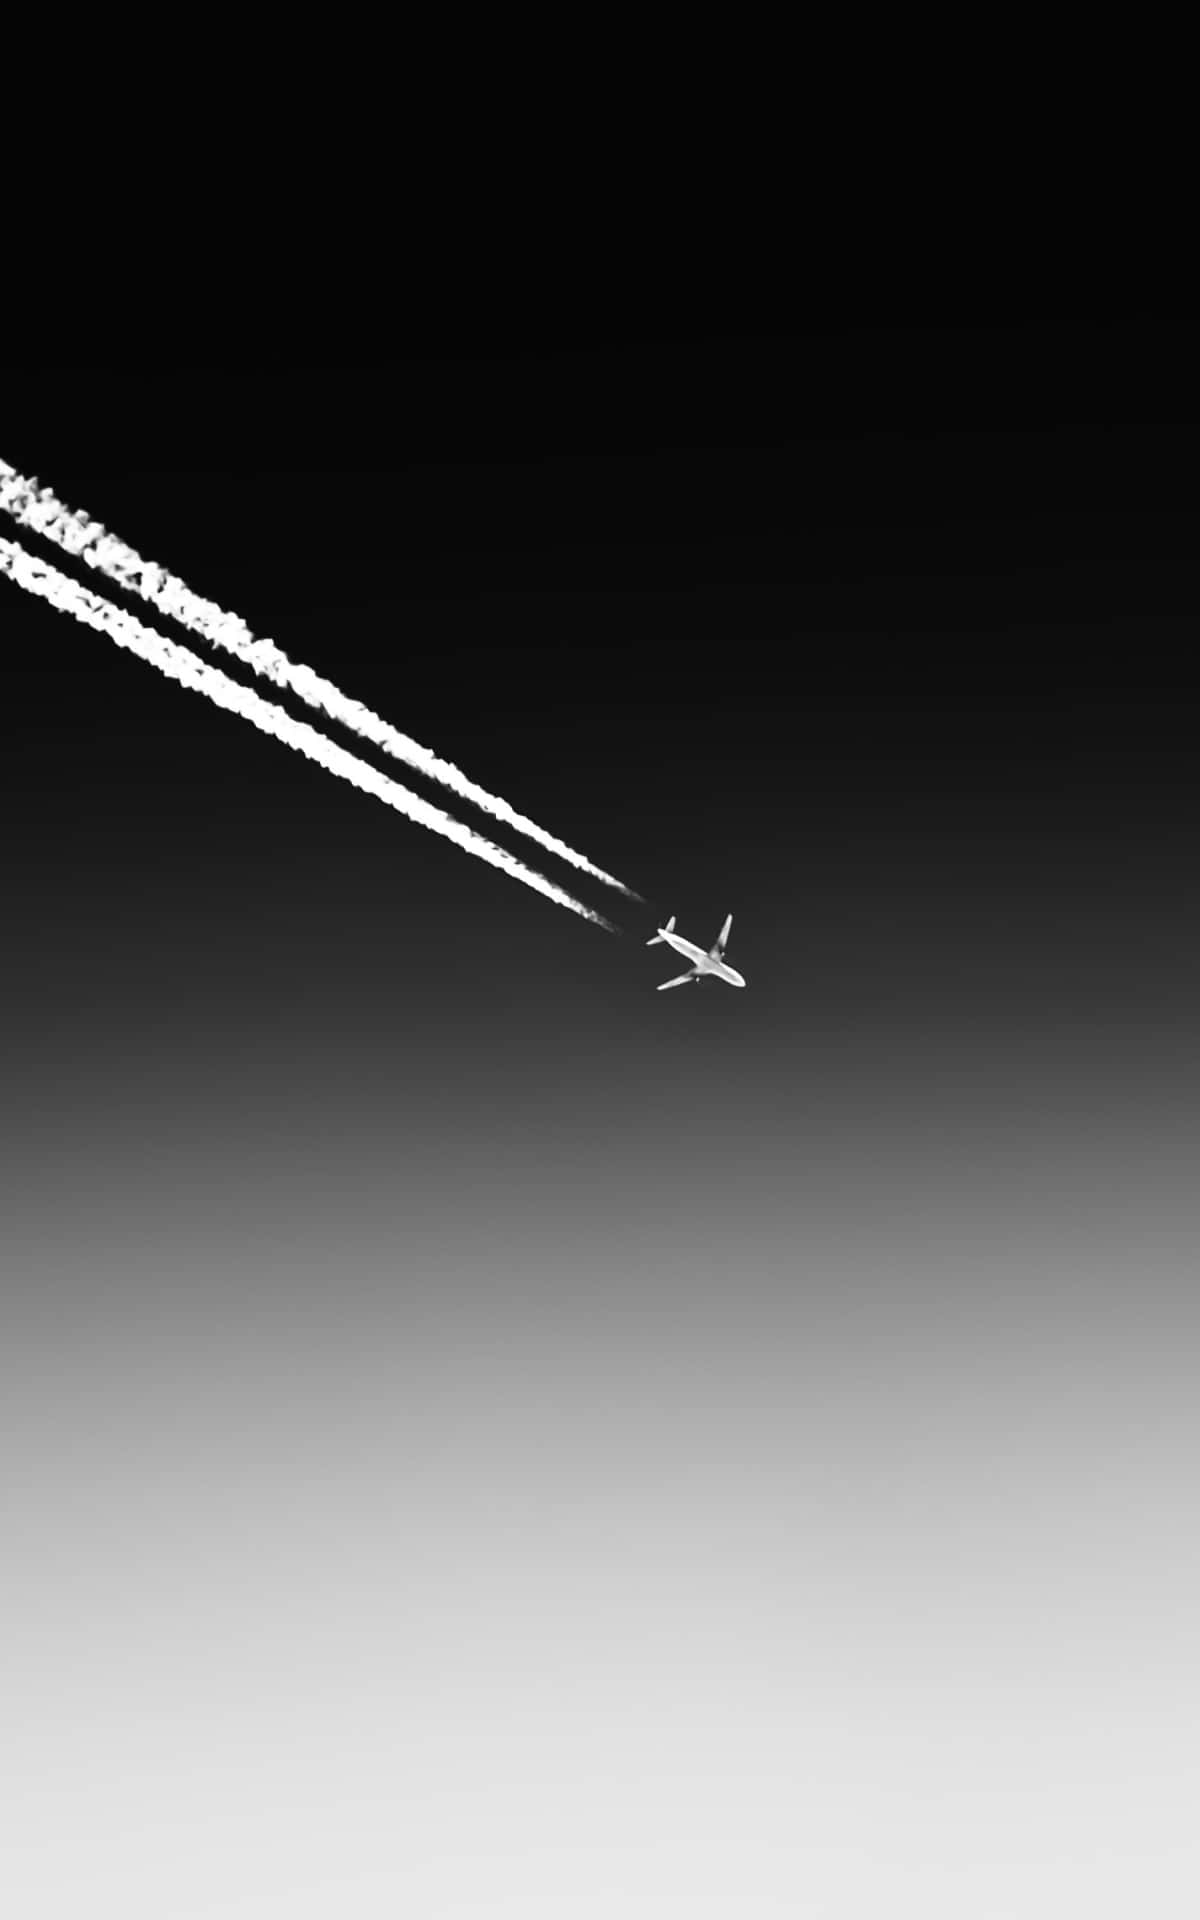 Monochrome Aircraft Android Plane Background